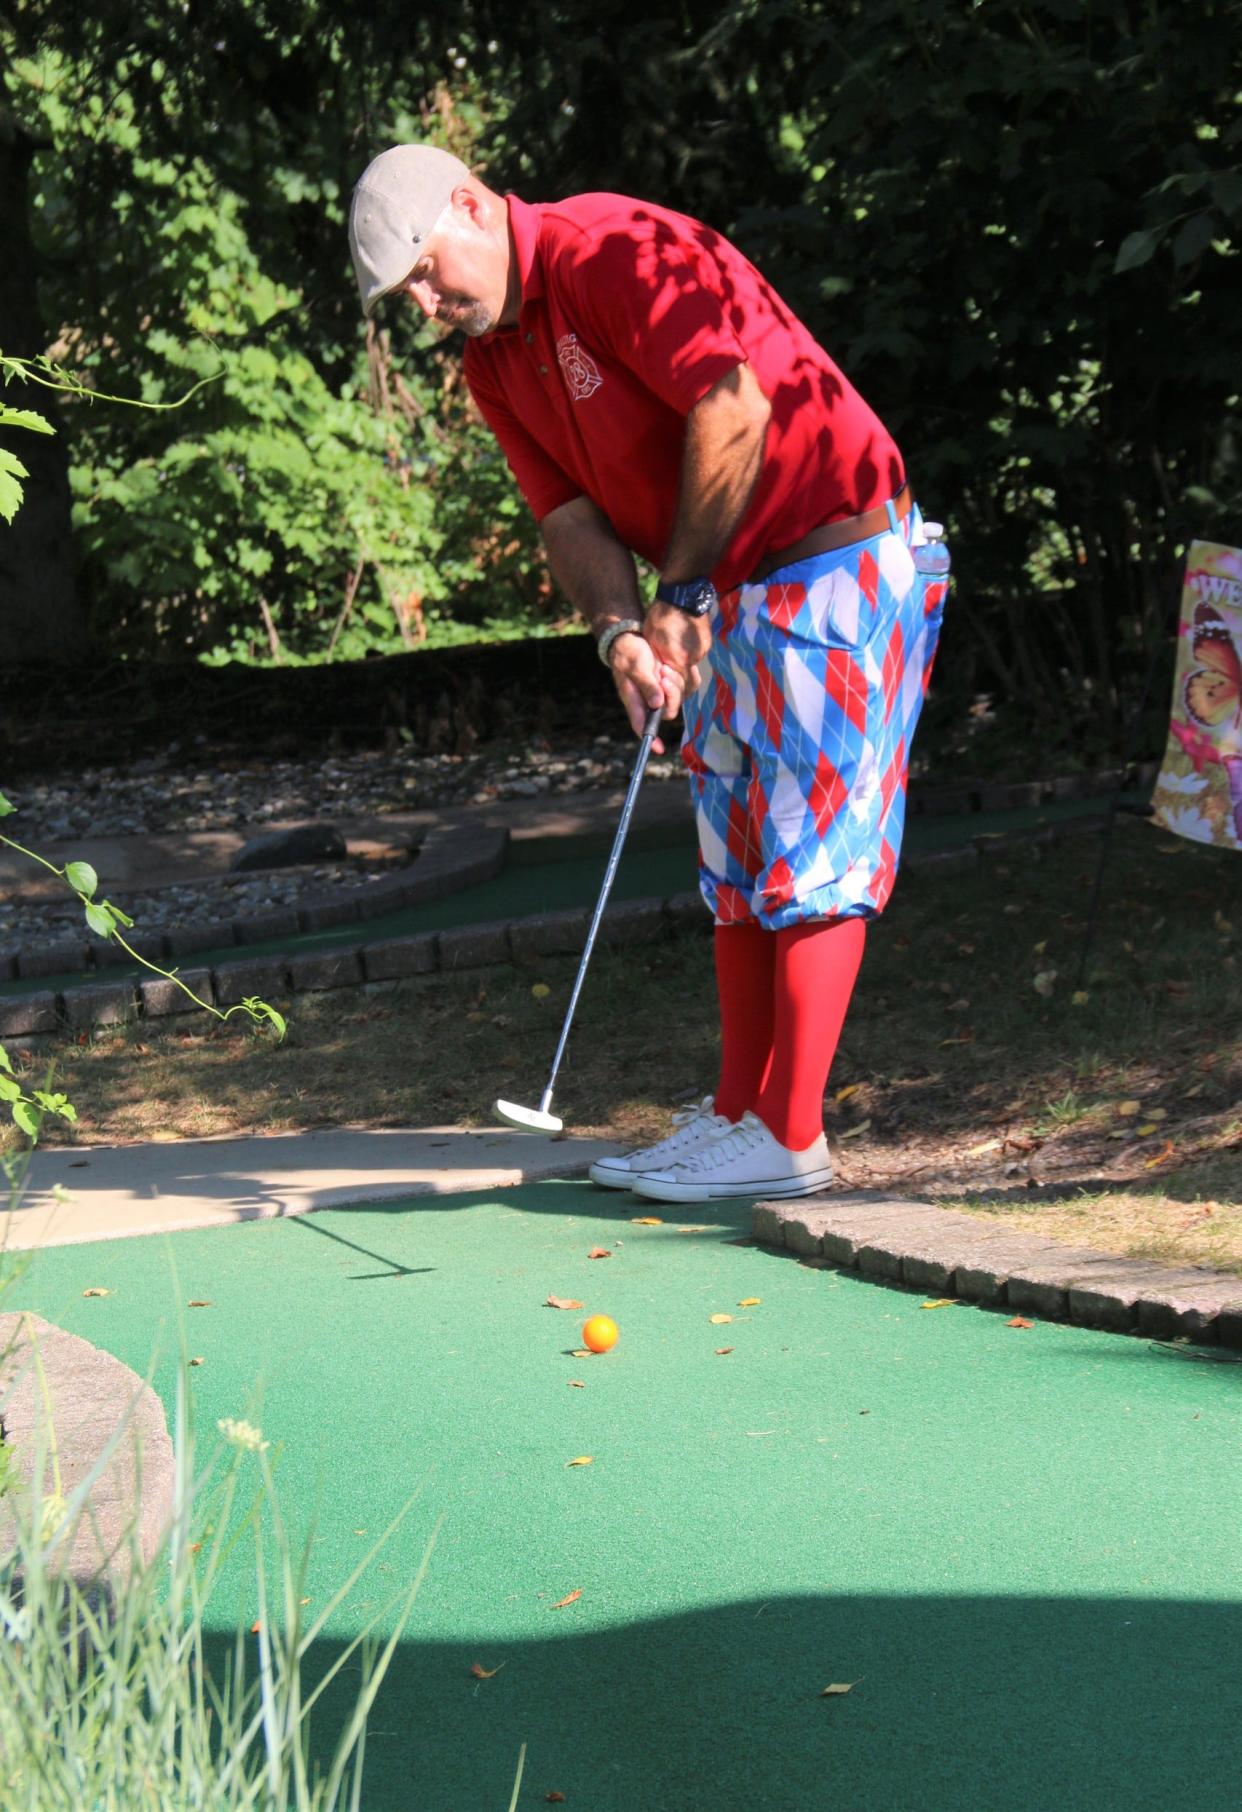 Firefighter/EMT Josh Tamulen takes a stroke at a mini golf competition between the town's firefighters and police.